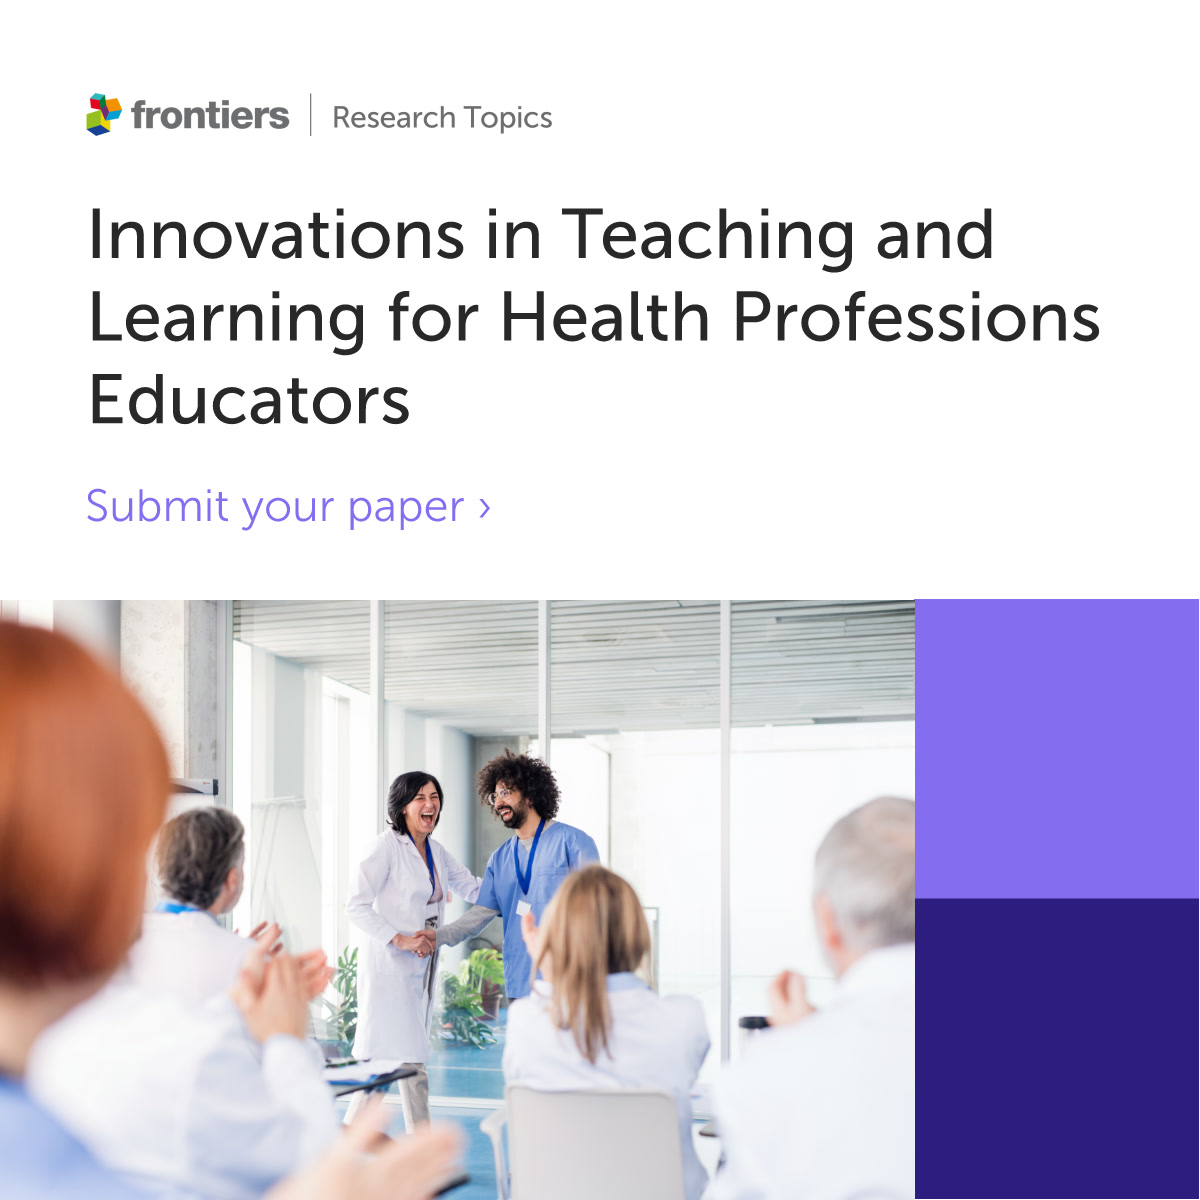 📢 Call for papers! Submissions are open for 'Innovations in Teaching and Learning for Health Professions Educators' Edited by Roger Edwards, Bobbie Ann Adair White @_BAAW_, and Ardi Findyartini @ArdiFindyartini Contribute or find out more ➡️ fro.ntiers.in/64130